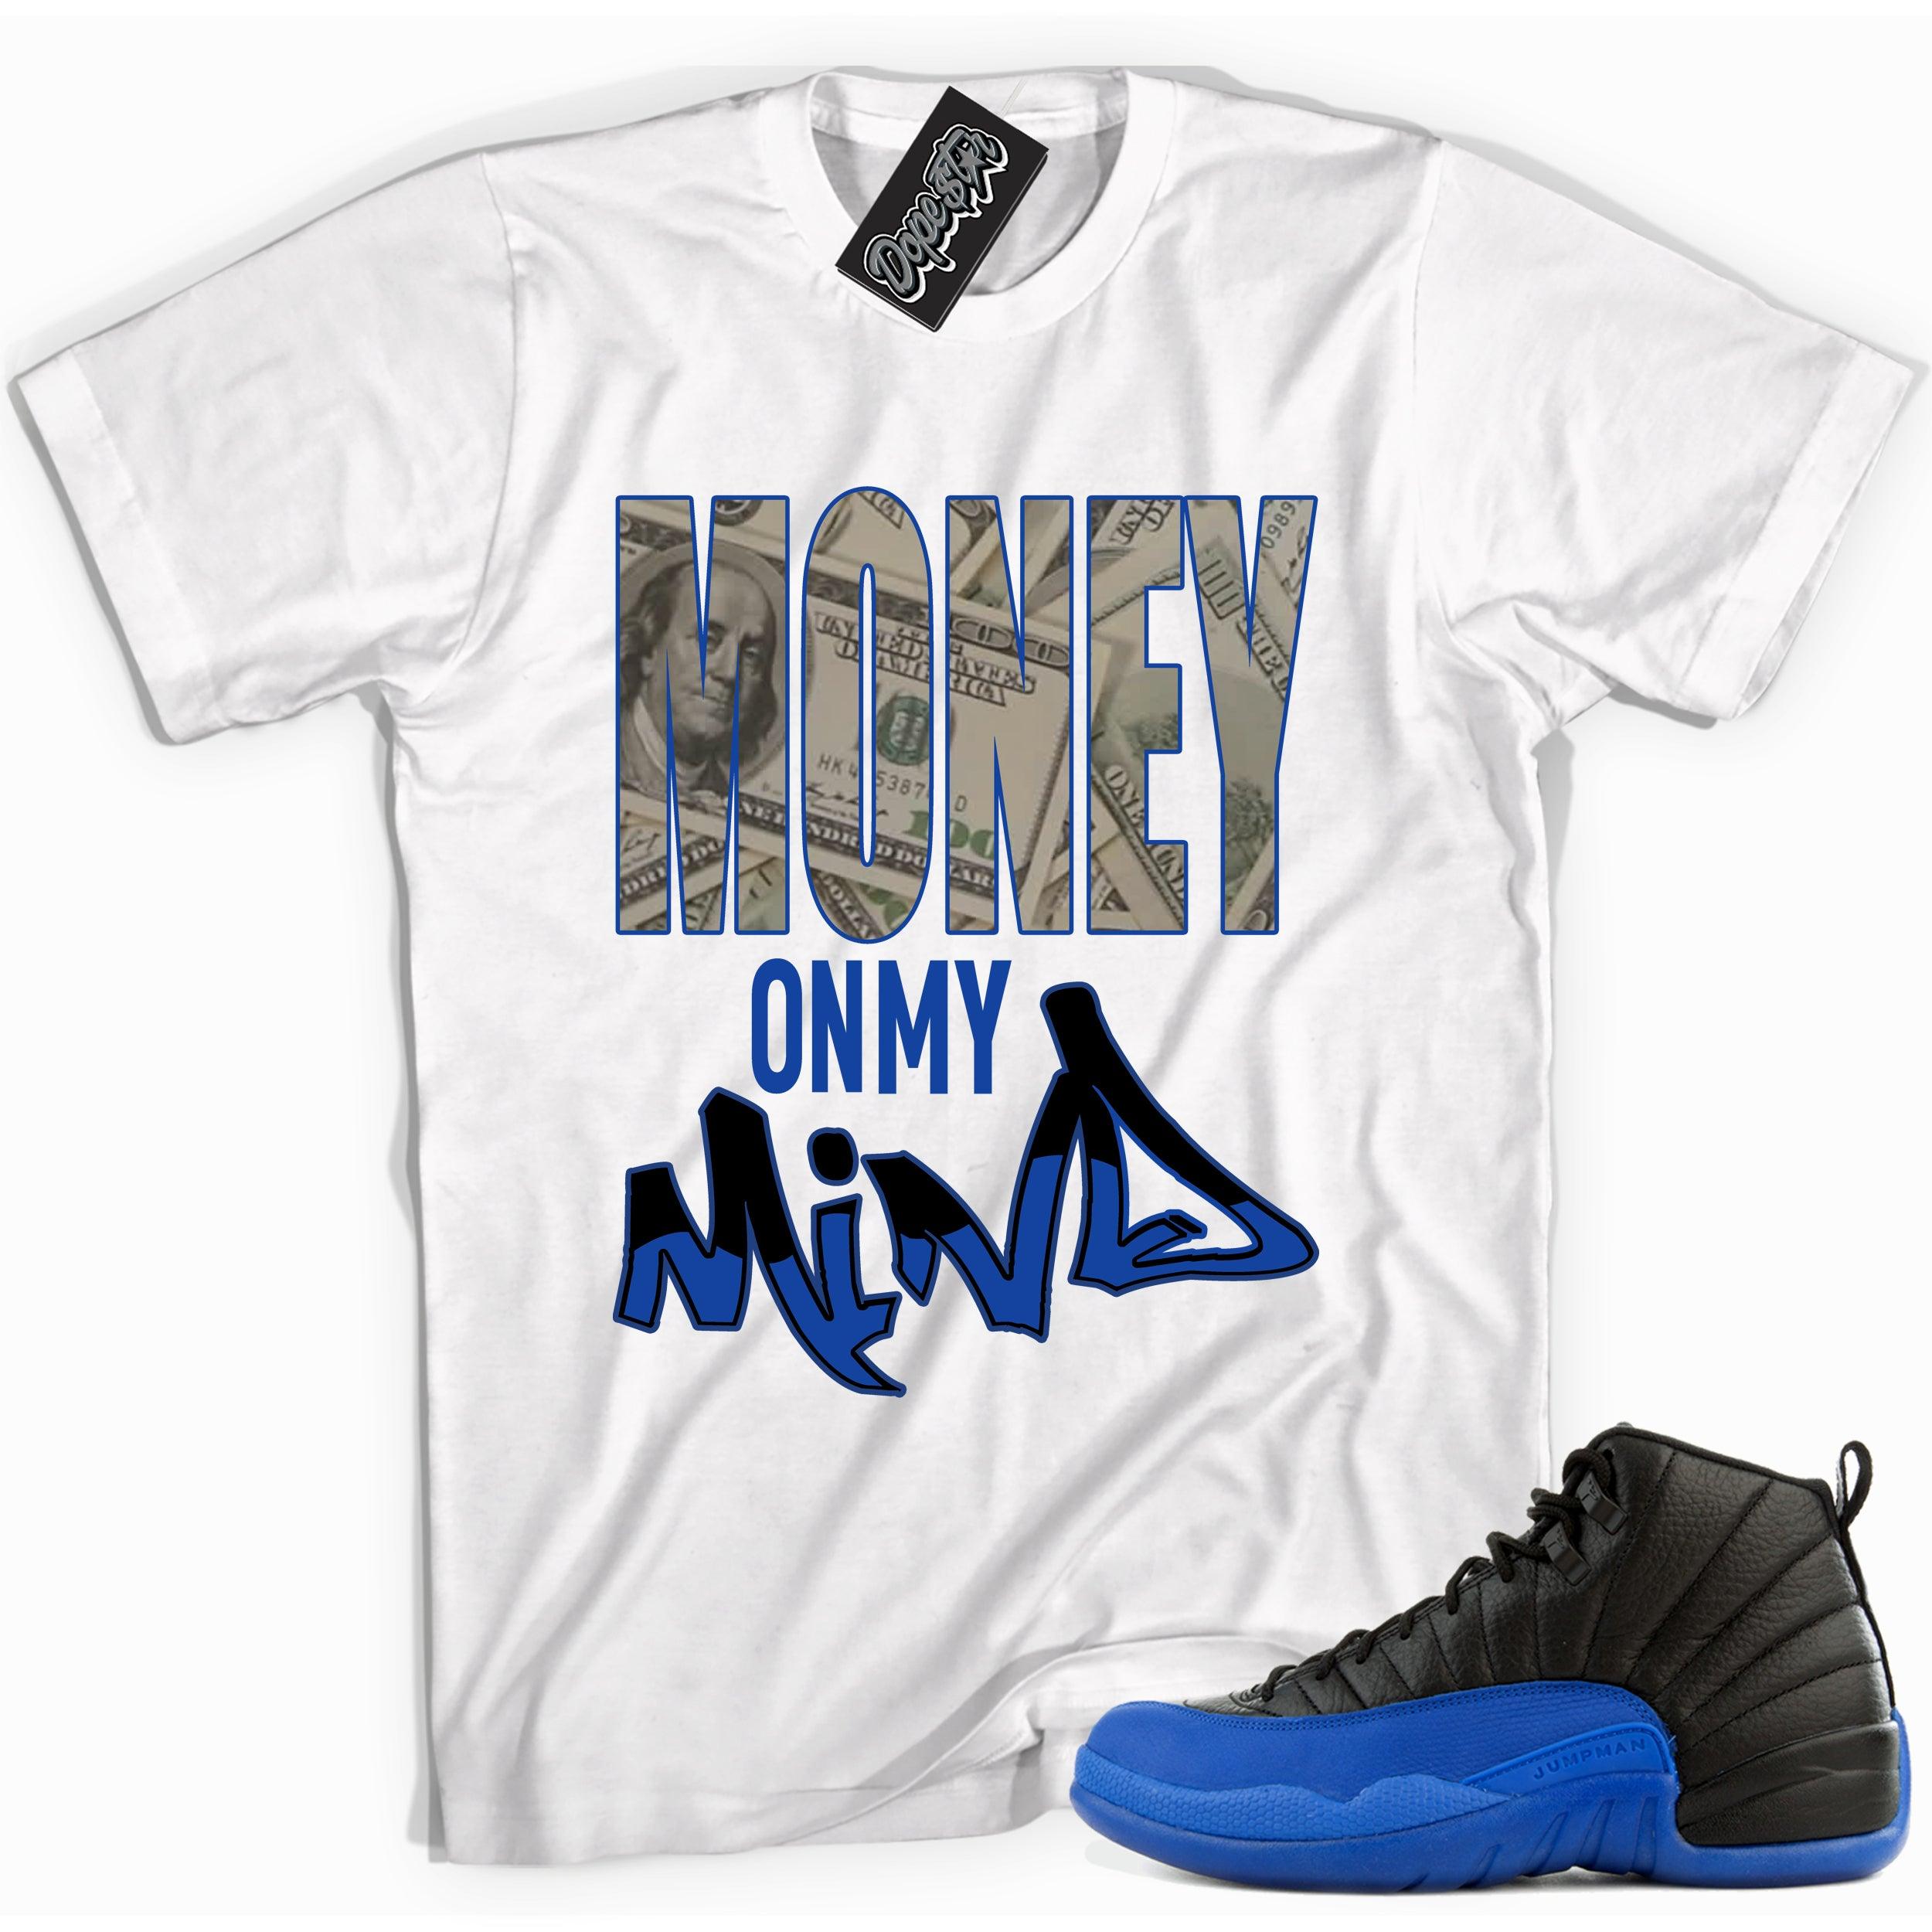 Cool white graphic tee with 'money on my mind' print, that perfectly matches Air Jordan 12 Retro Black Game Royal sneakers.